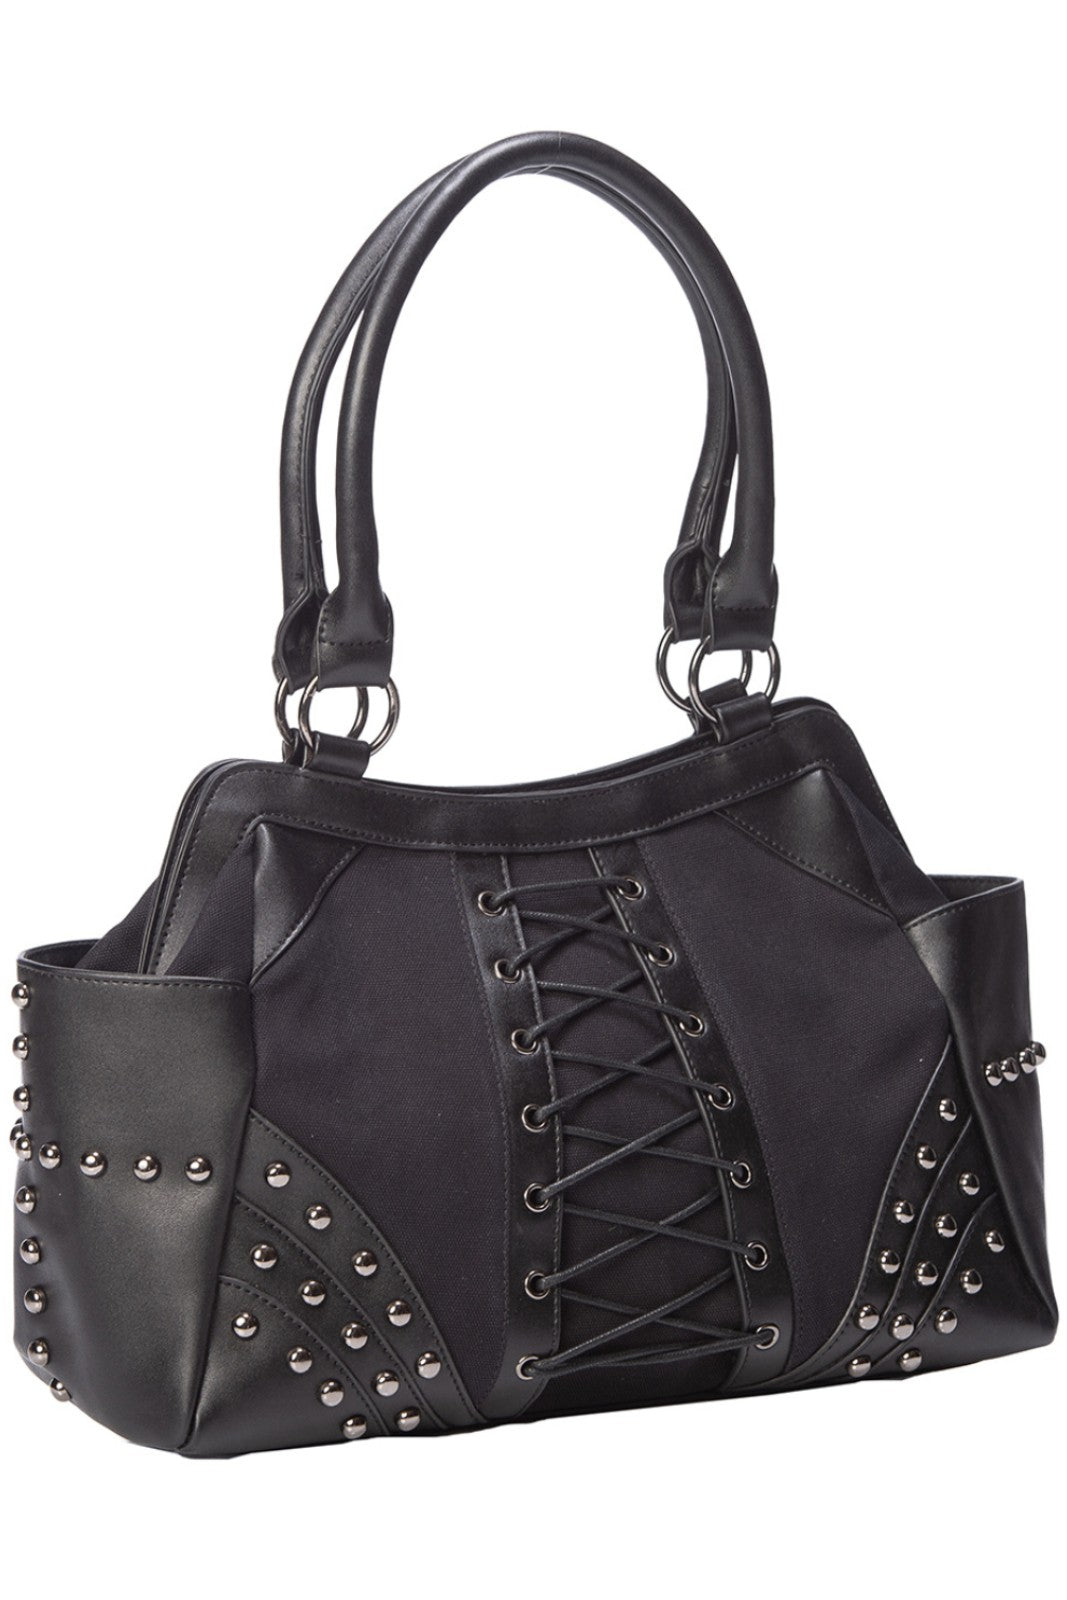 Banned Studded Corset Gothic Annabel Lee Faux Leather Bag